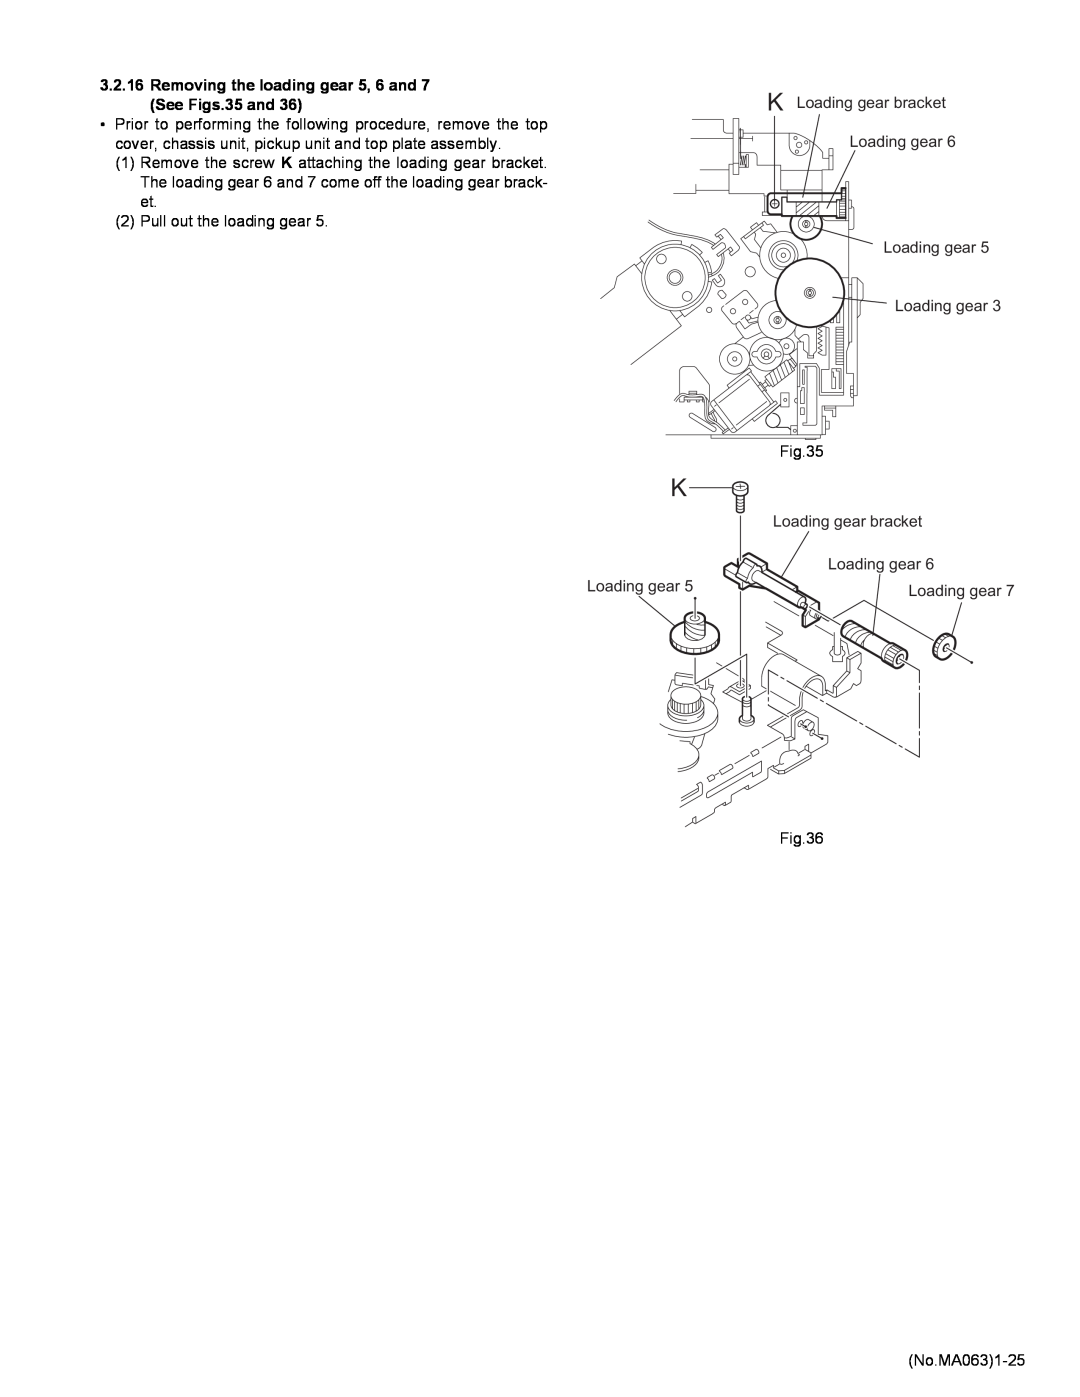 JVC KD-LH401 service manual Removing the loading gear 5, 6 and 7 See Figs.35 and 